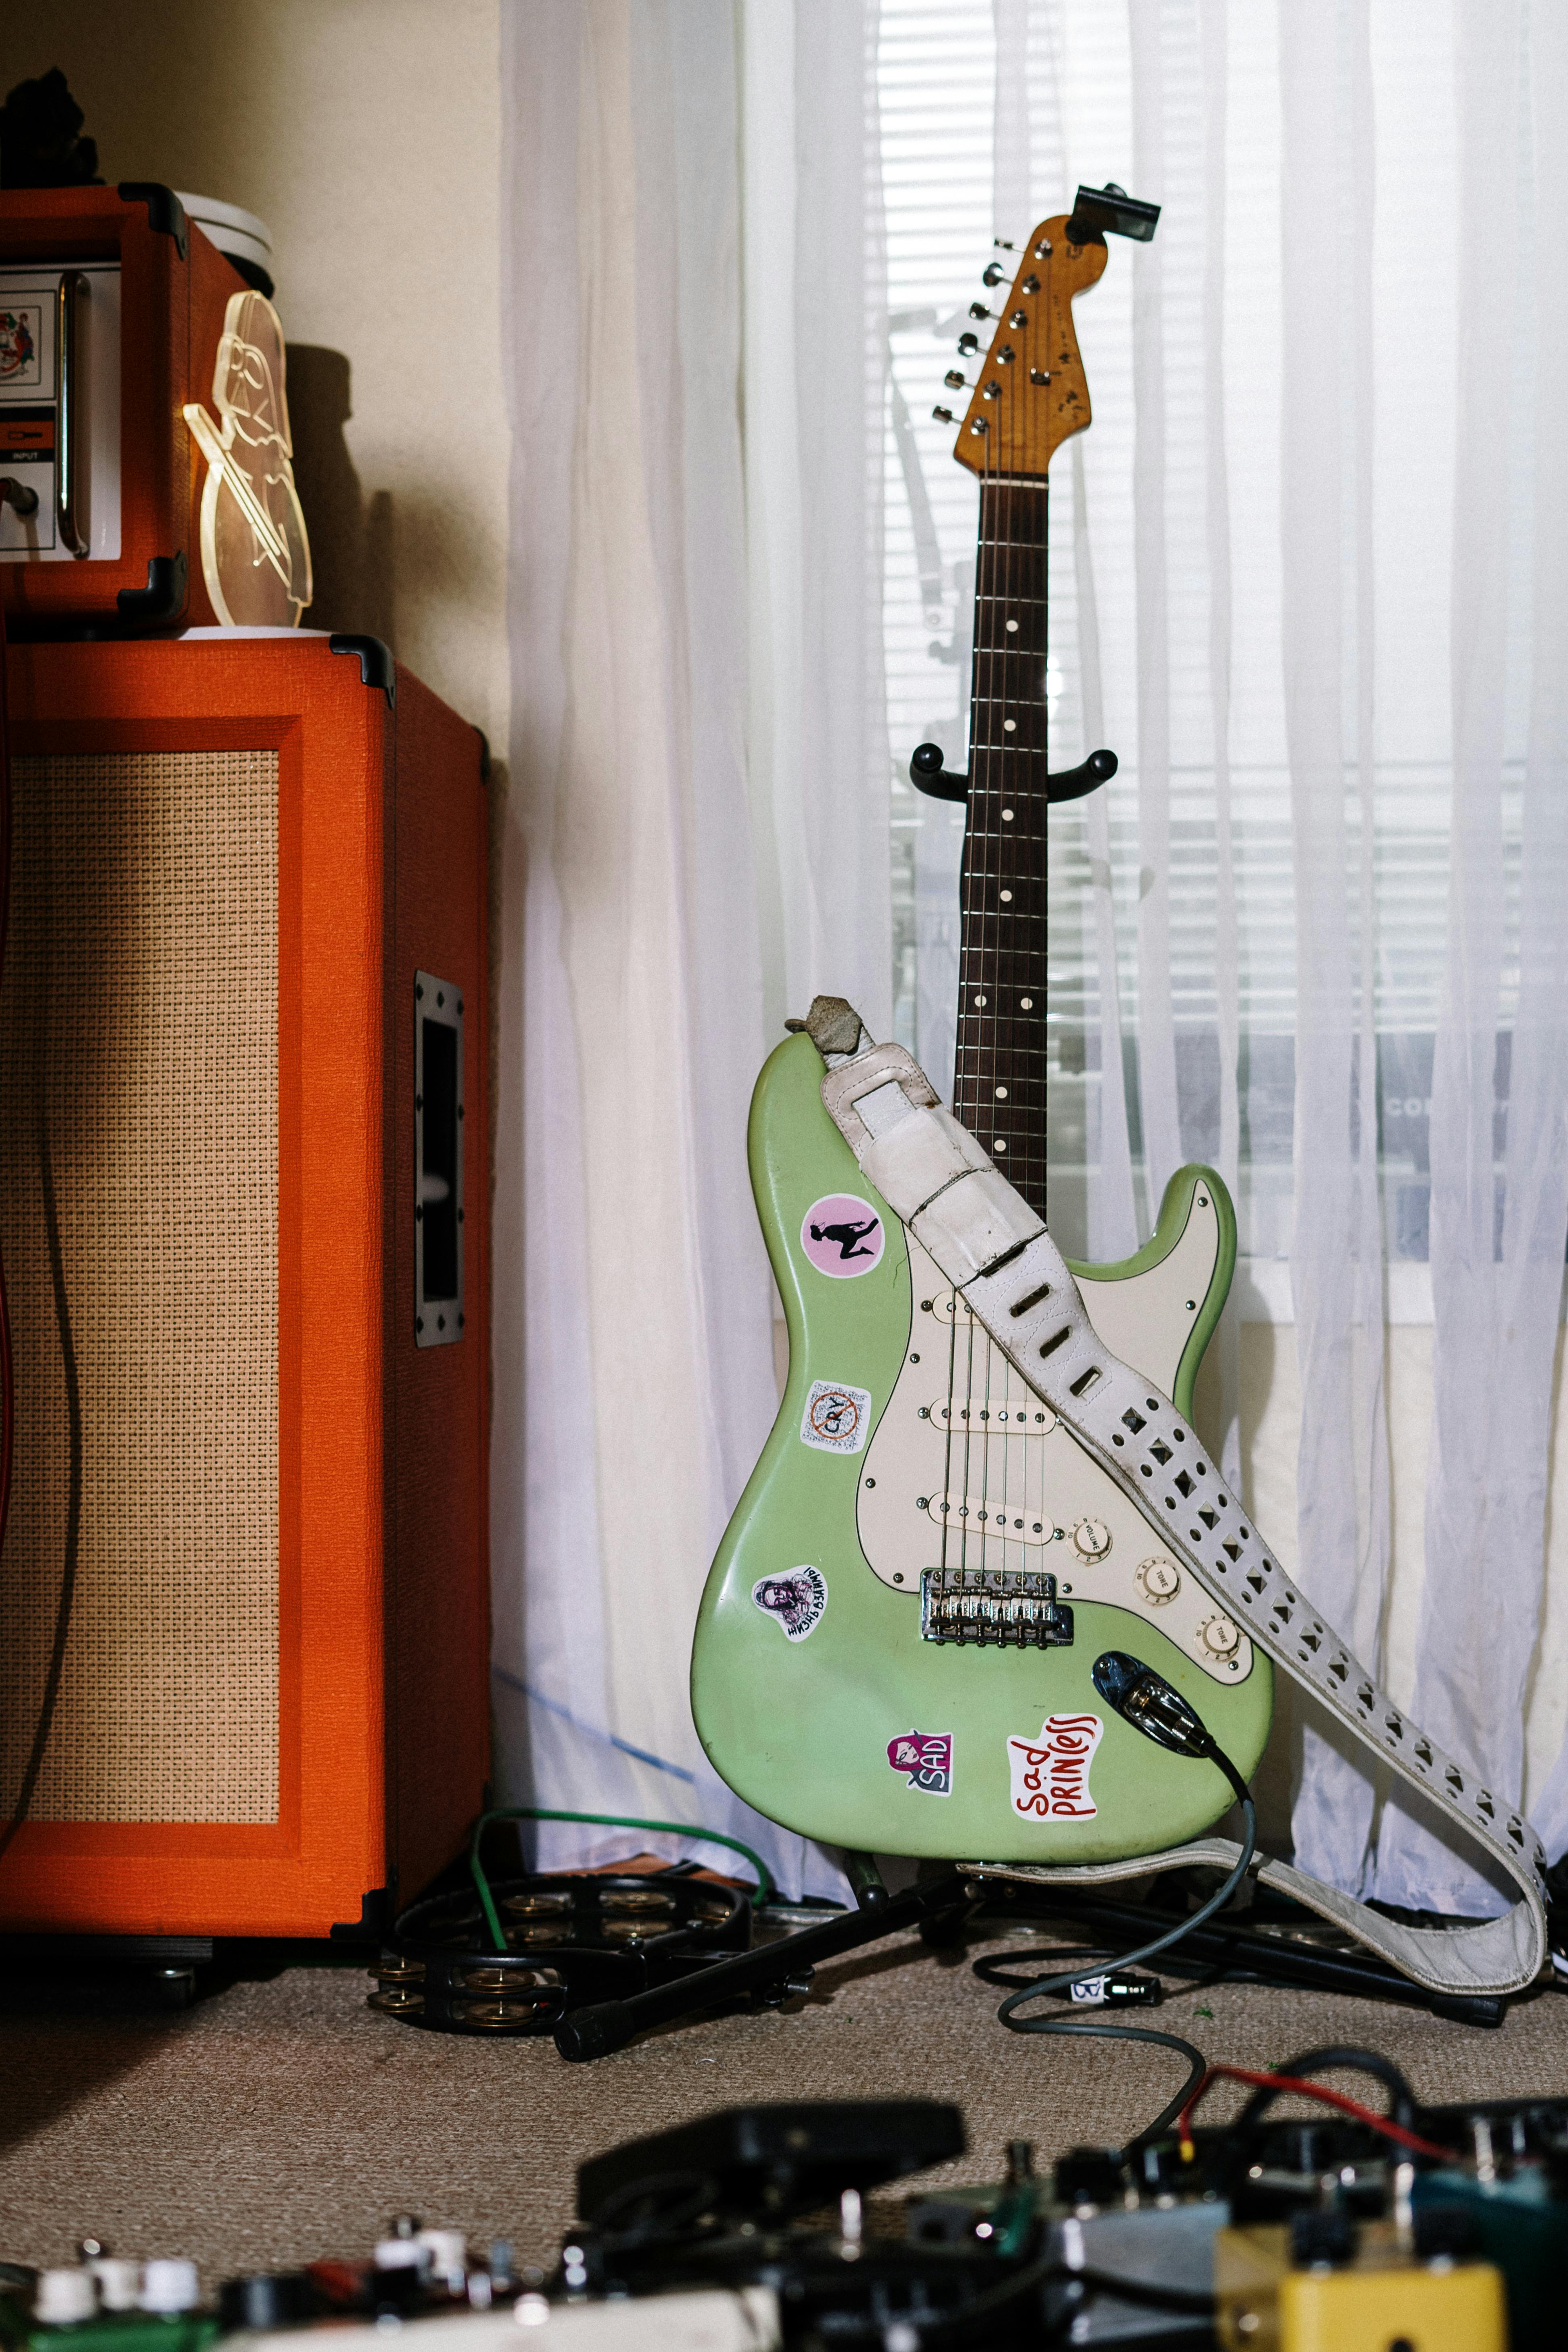 Surf Green Stratocaster always brings good surf vibes